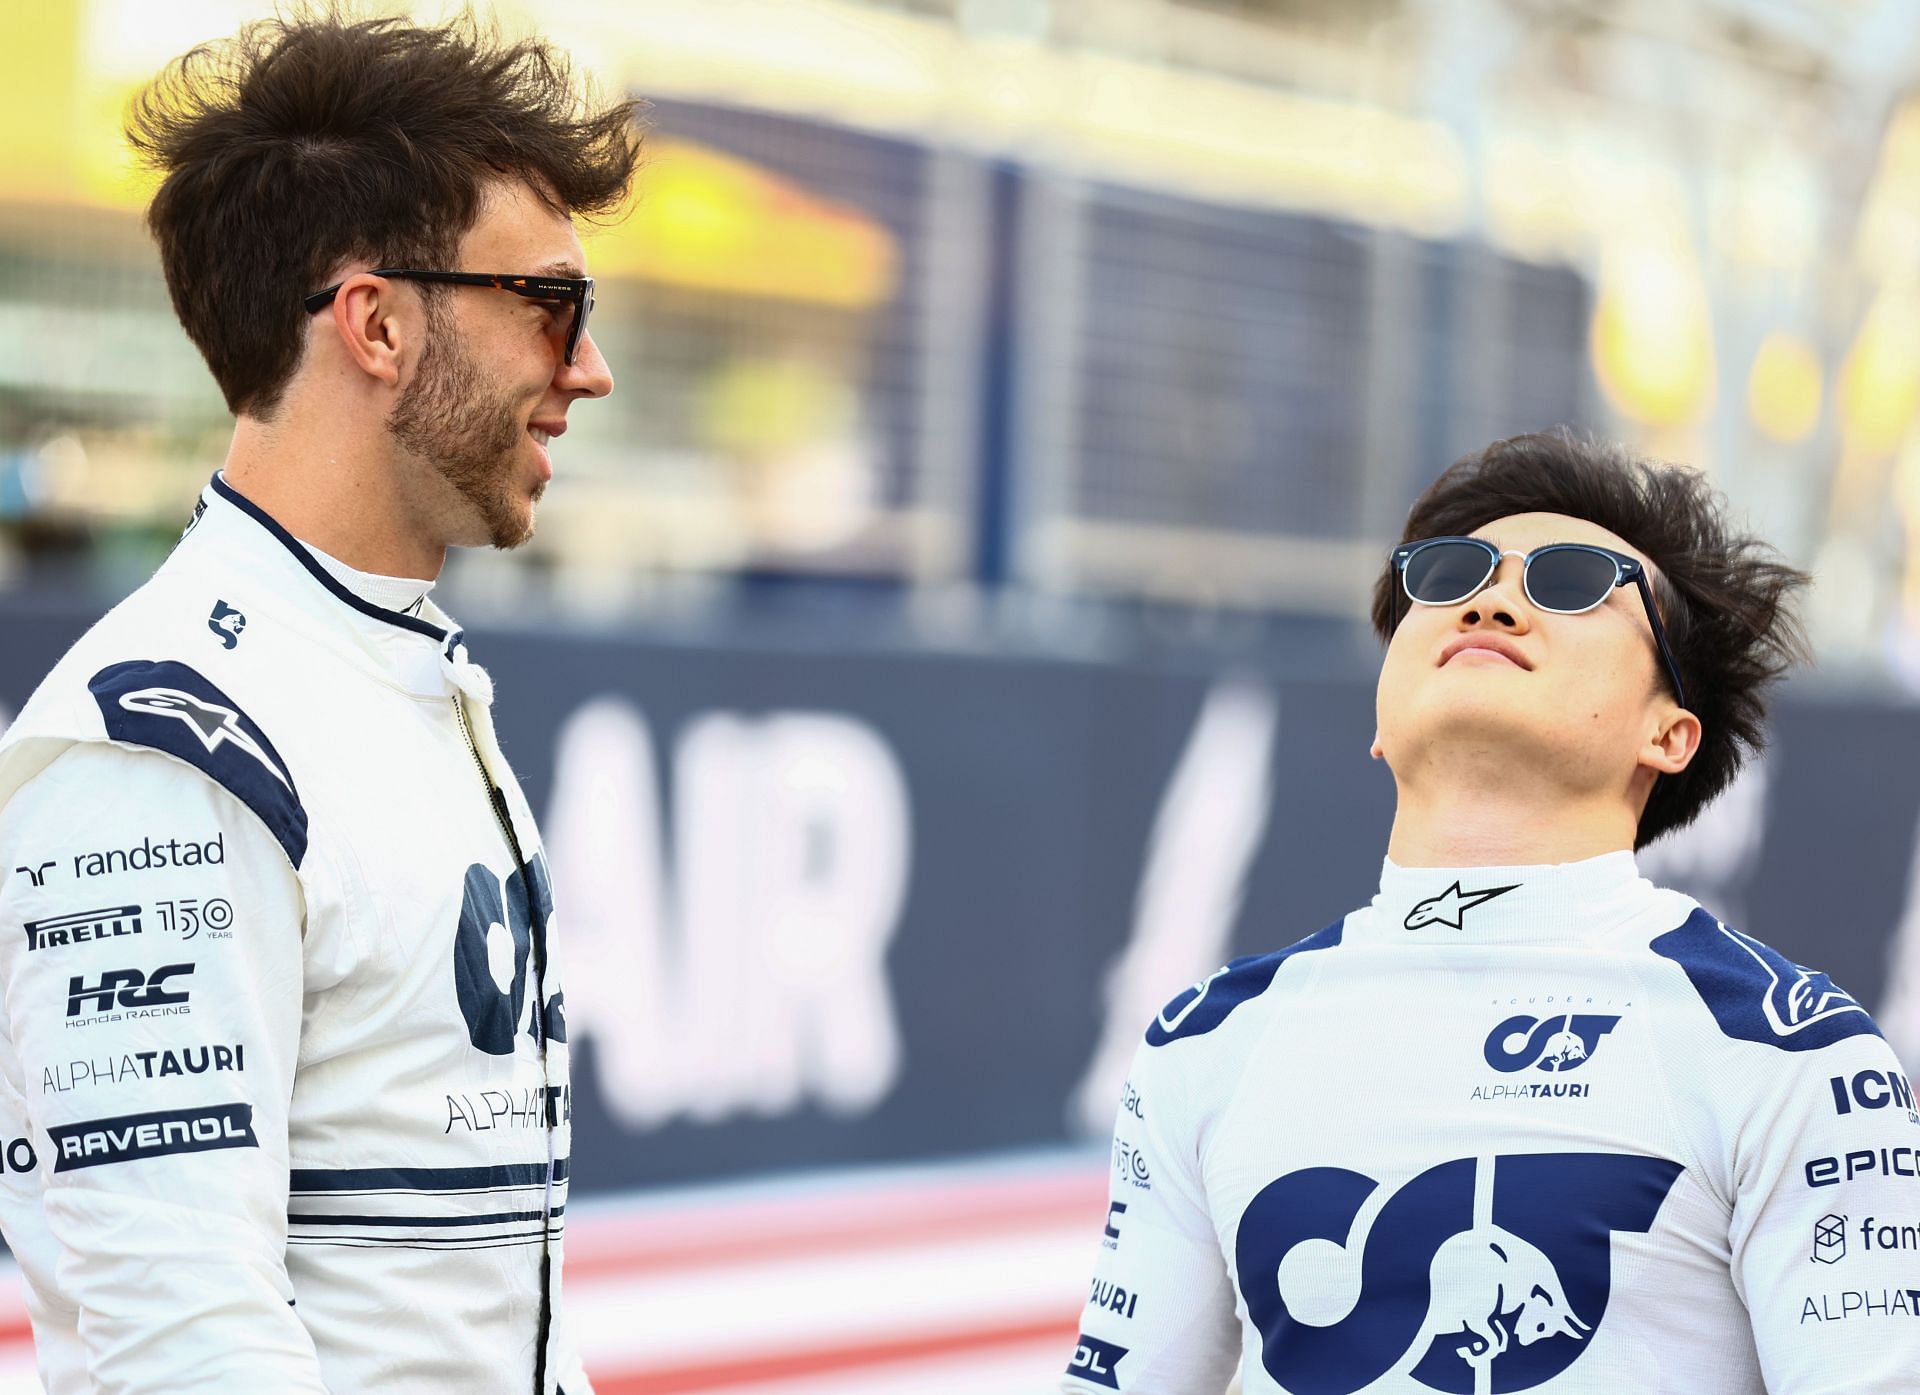 AlphaTauri drivers Pierre Gasly and Yuki Tsunoda of Japan in Bahrain. (Photo by Mark Thompson/Getty Images)